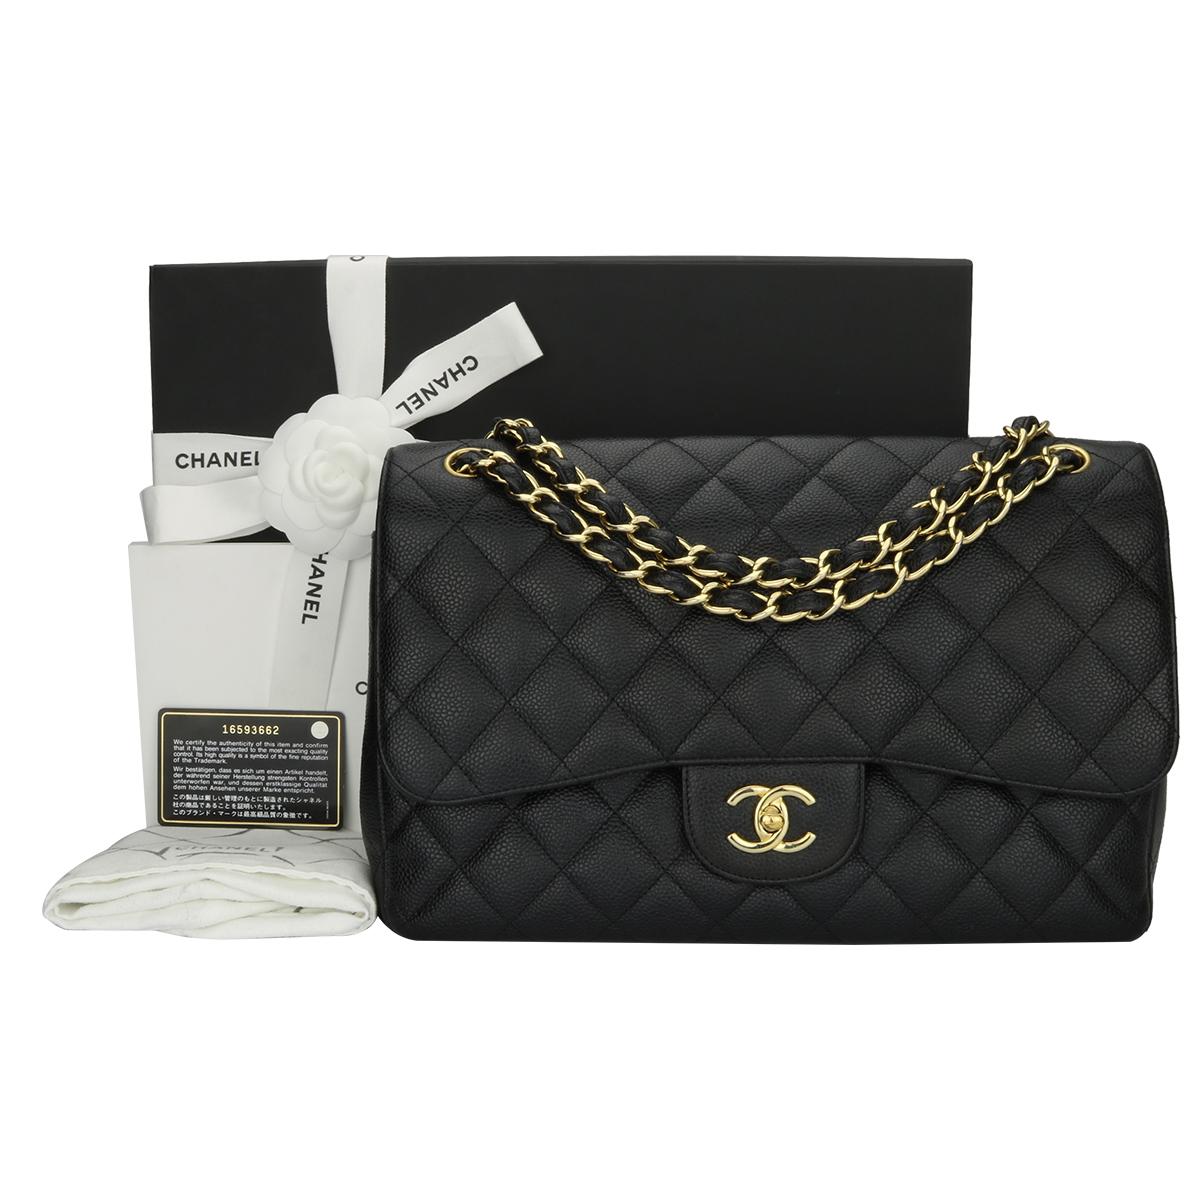 Authentic CHANEL Classic Jumbo Double Flap Black Caviar with Gold Hardware 2012.

This stunning bag is in excellent condition, the bag still holds its original shape, and the hardware is still very shiny.

Exterior Condition: Excellent condition,